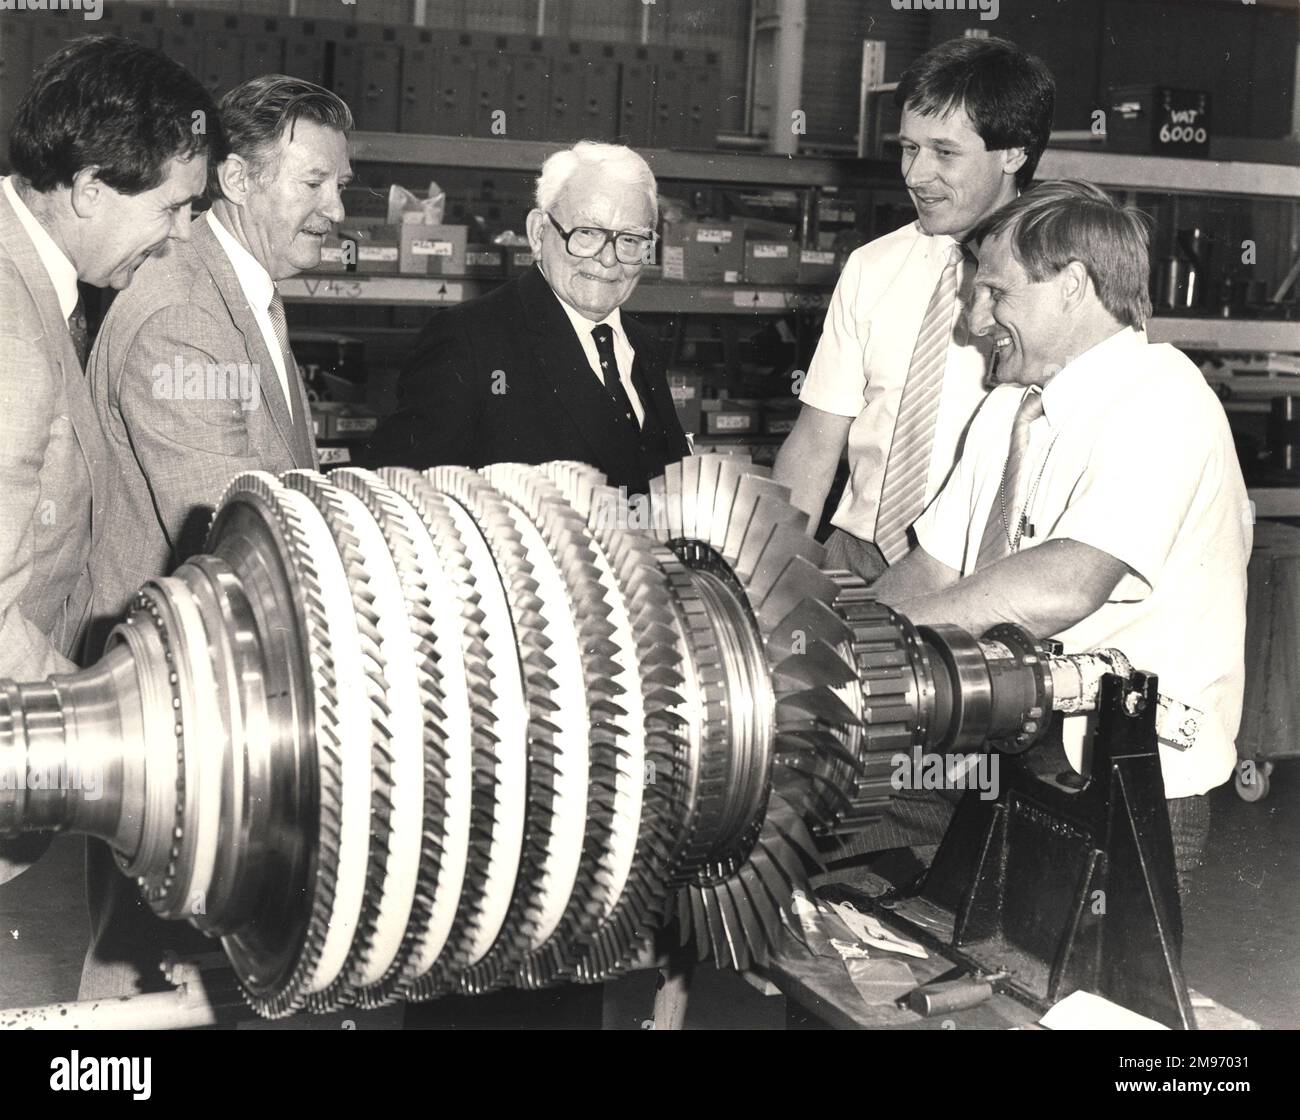 “Sir Frank Whittle (centre) the jet engine pioneer whose first engine ran successfully 50 years ago saw one of its direct descendants, the V2500 turbofan, at Rolls-Royce, Derby. The V2500 is 18 times more powerful than the first Whittle unit (WU) but uses less than one third as much fuel per pound of thrust. Here Sir Frank views the assembly of the high pressure compressor rotor. The first WU ran on 12 April 1937 at Whittle’s Power Jets company at Lutterworth only 35 miles from where Rolls-Royce’s Derby plant now stands.” 13 August 1987. Stock Photo